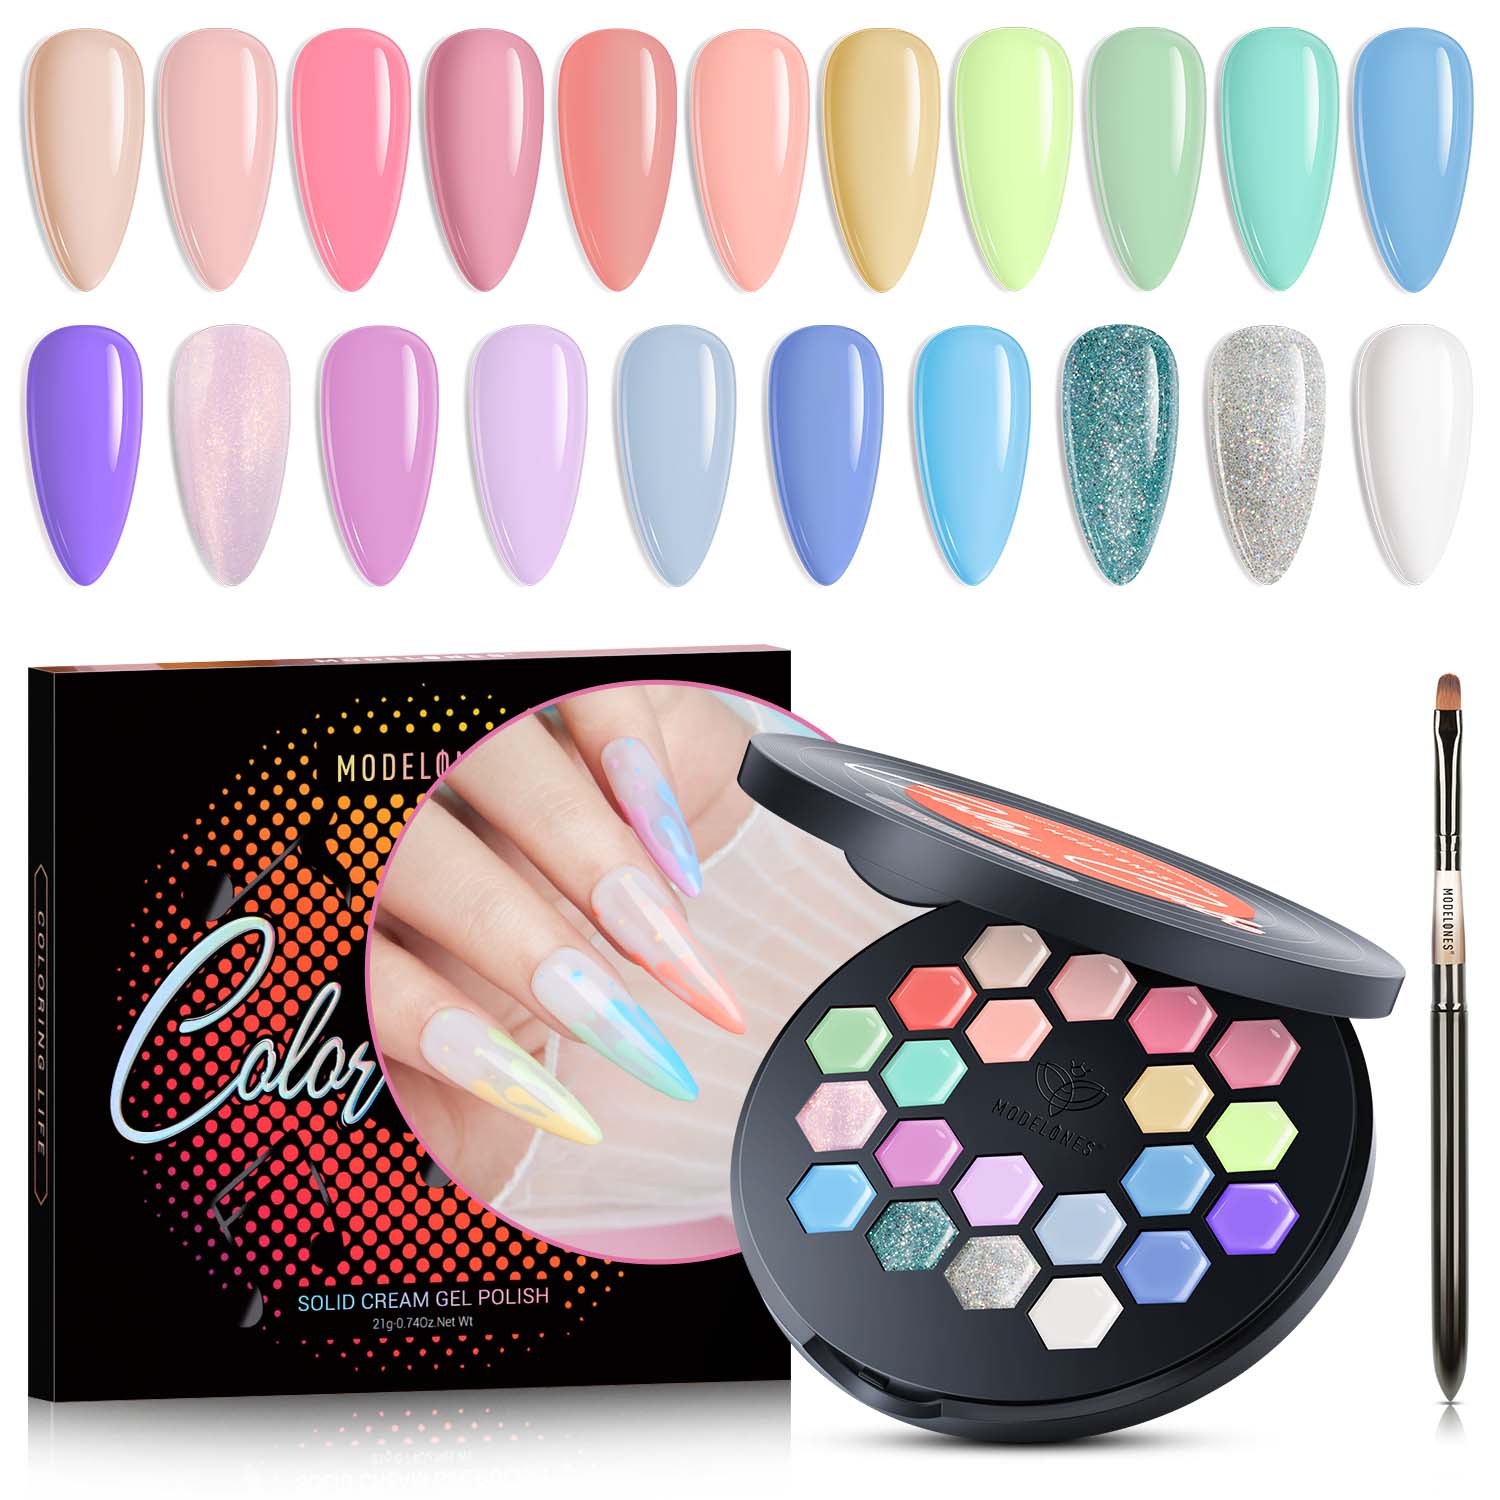 Macaron Paradise - 21 Colors Vinyl Record Solid Cream Gel Polish Color Cube【US ONLY】